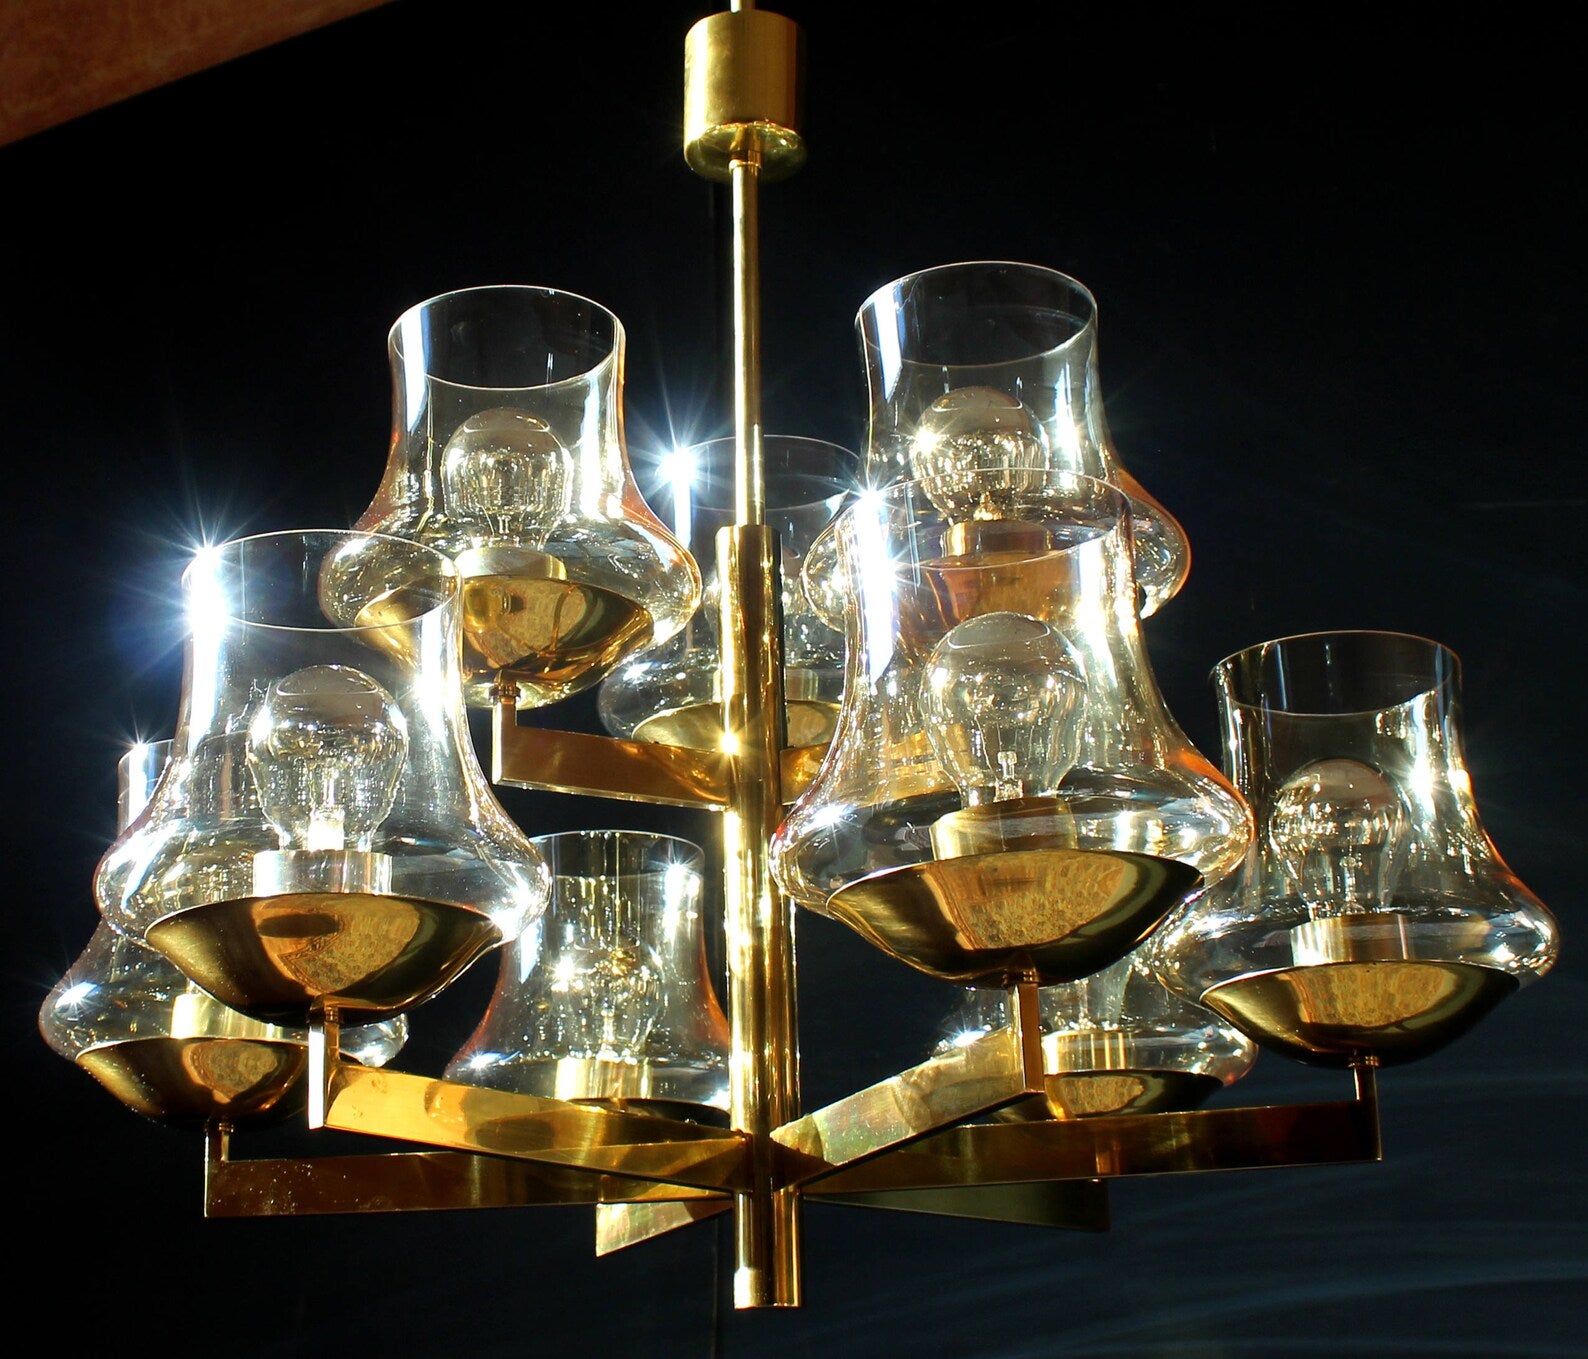 Elegant modernist chandelier 1970s brass with 9 + 1 glass globes in gold nuances by Kaiser

Measures: diameter 27